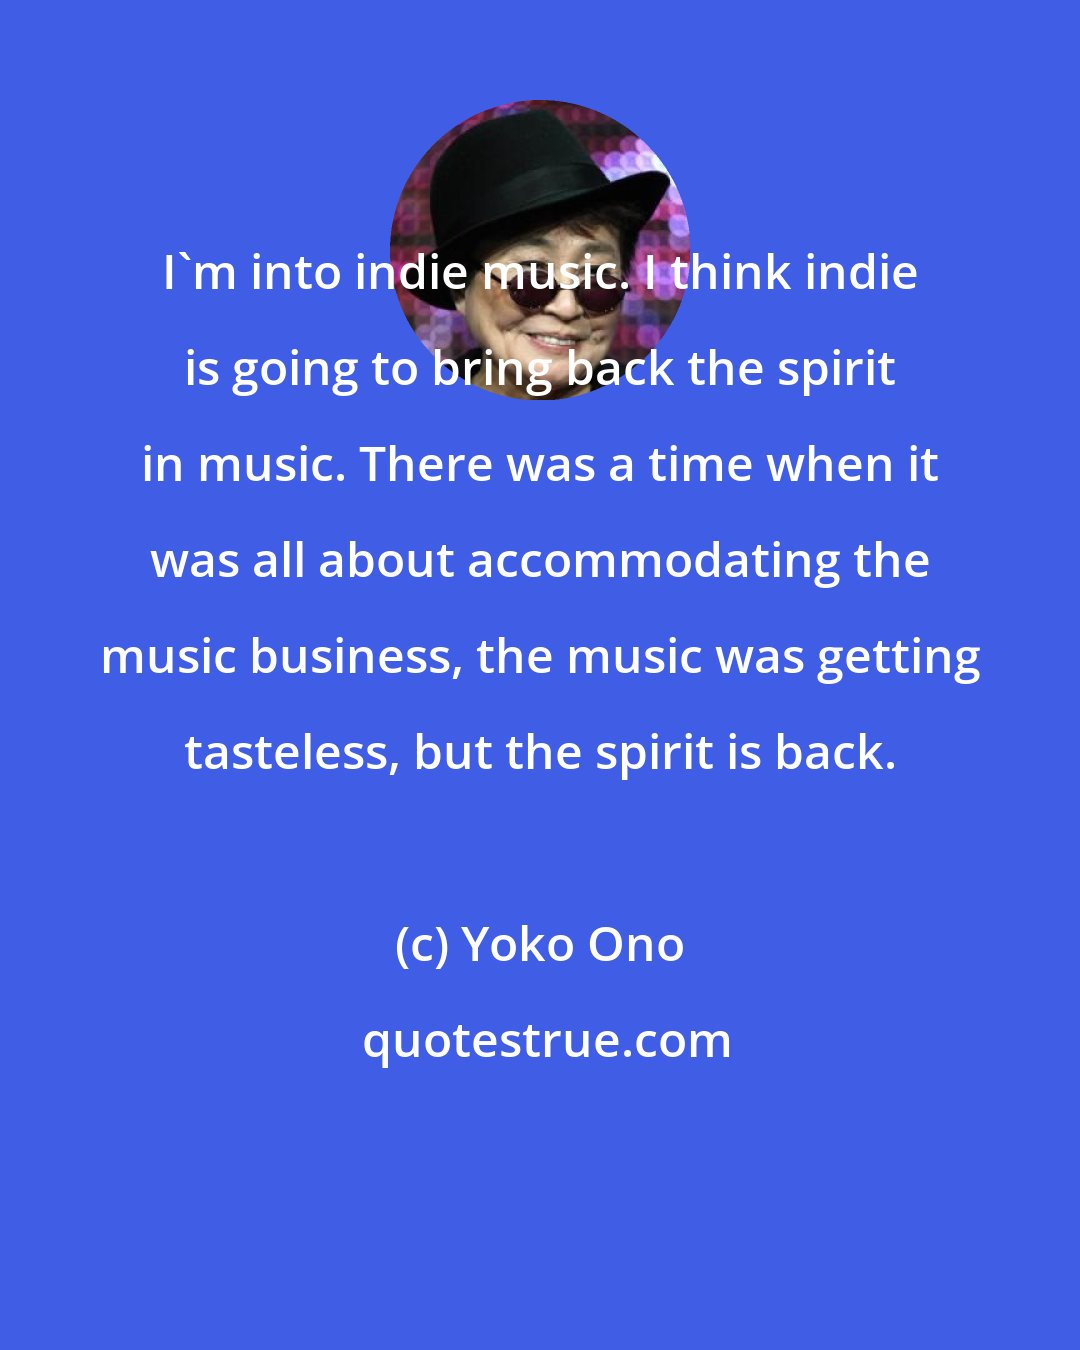 Yoko Ono: I'm into indie music. I think indie is going to bring back the spirit in music. There was a time when it was all about accommodating the music business, the music was getting tasteless, but the spirit is back.